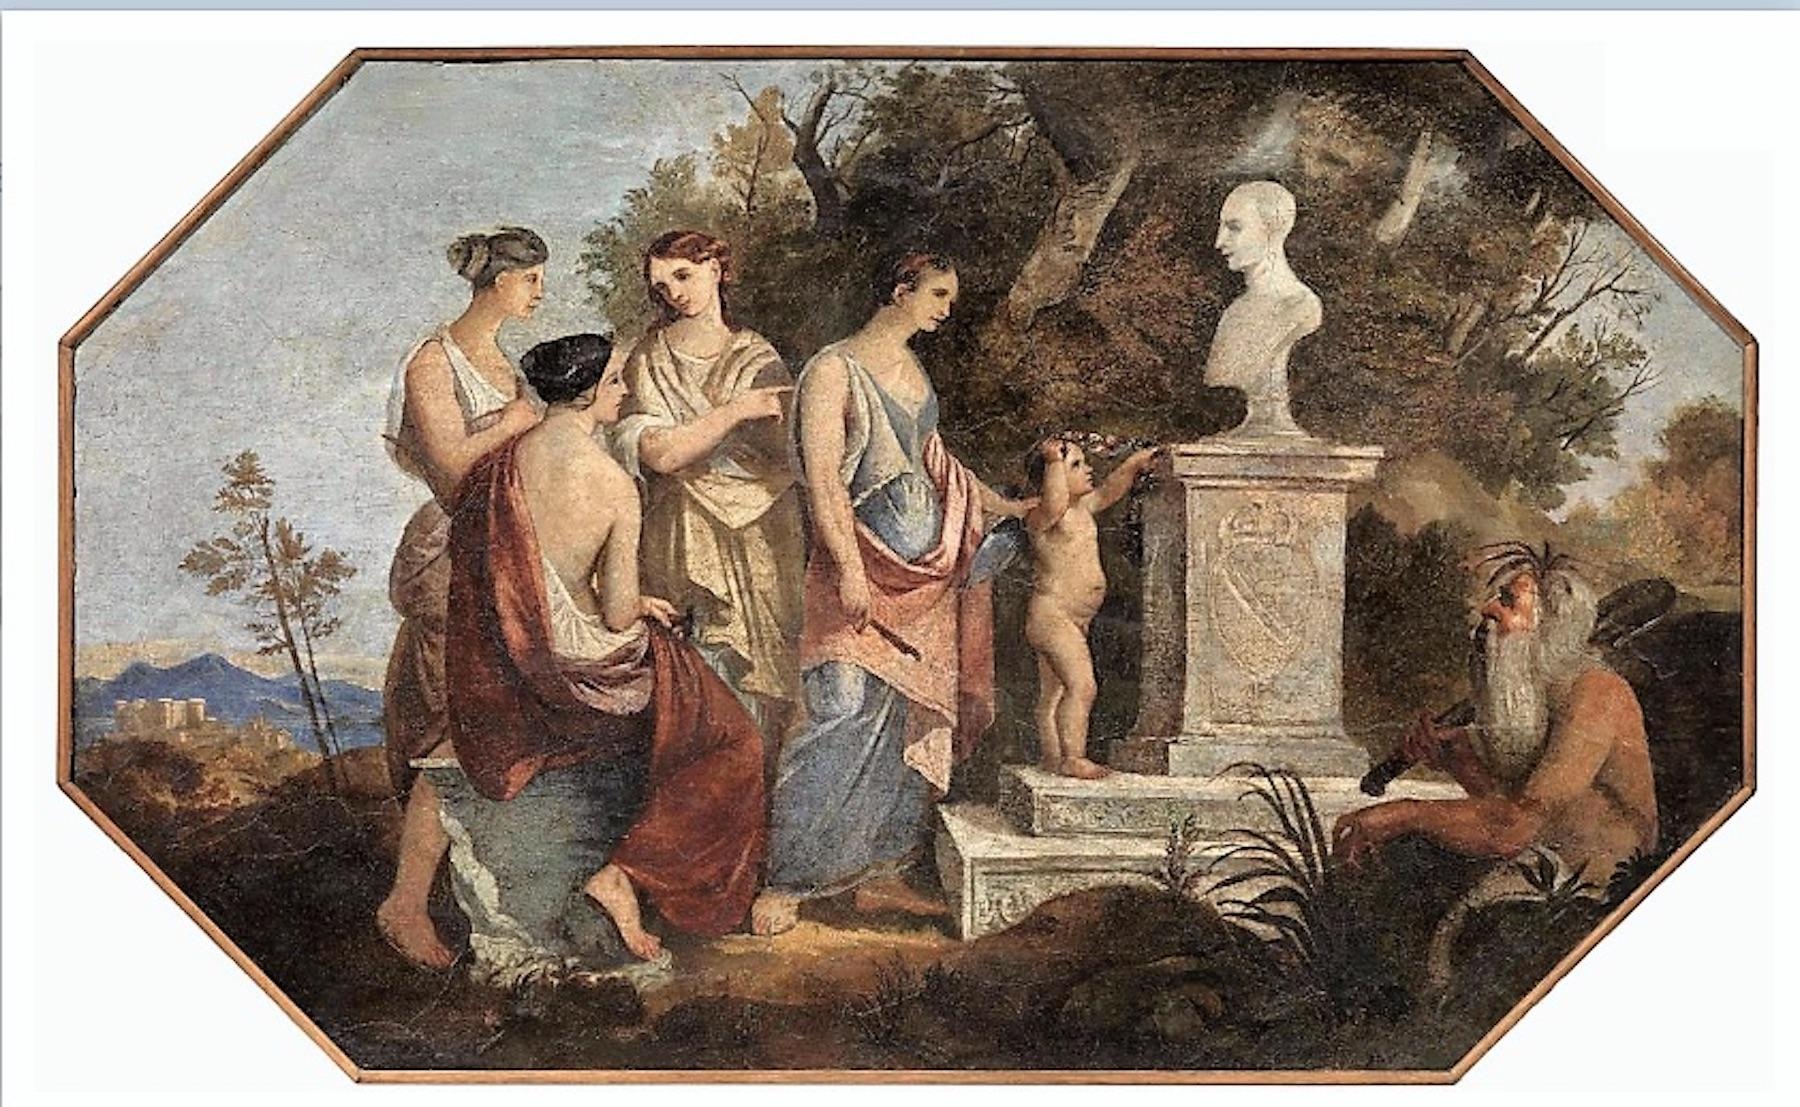 Unknown Figurative Print - Allegoric Scene with Vestal Virgins and Satyr - 19th Century - Painting - Modern